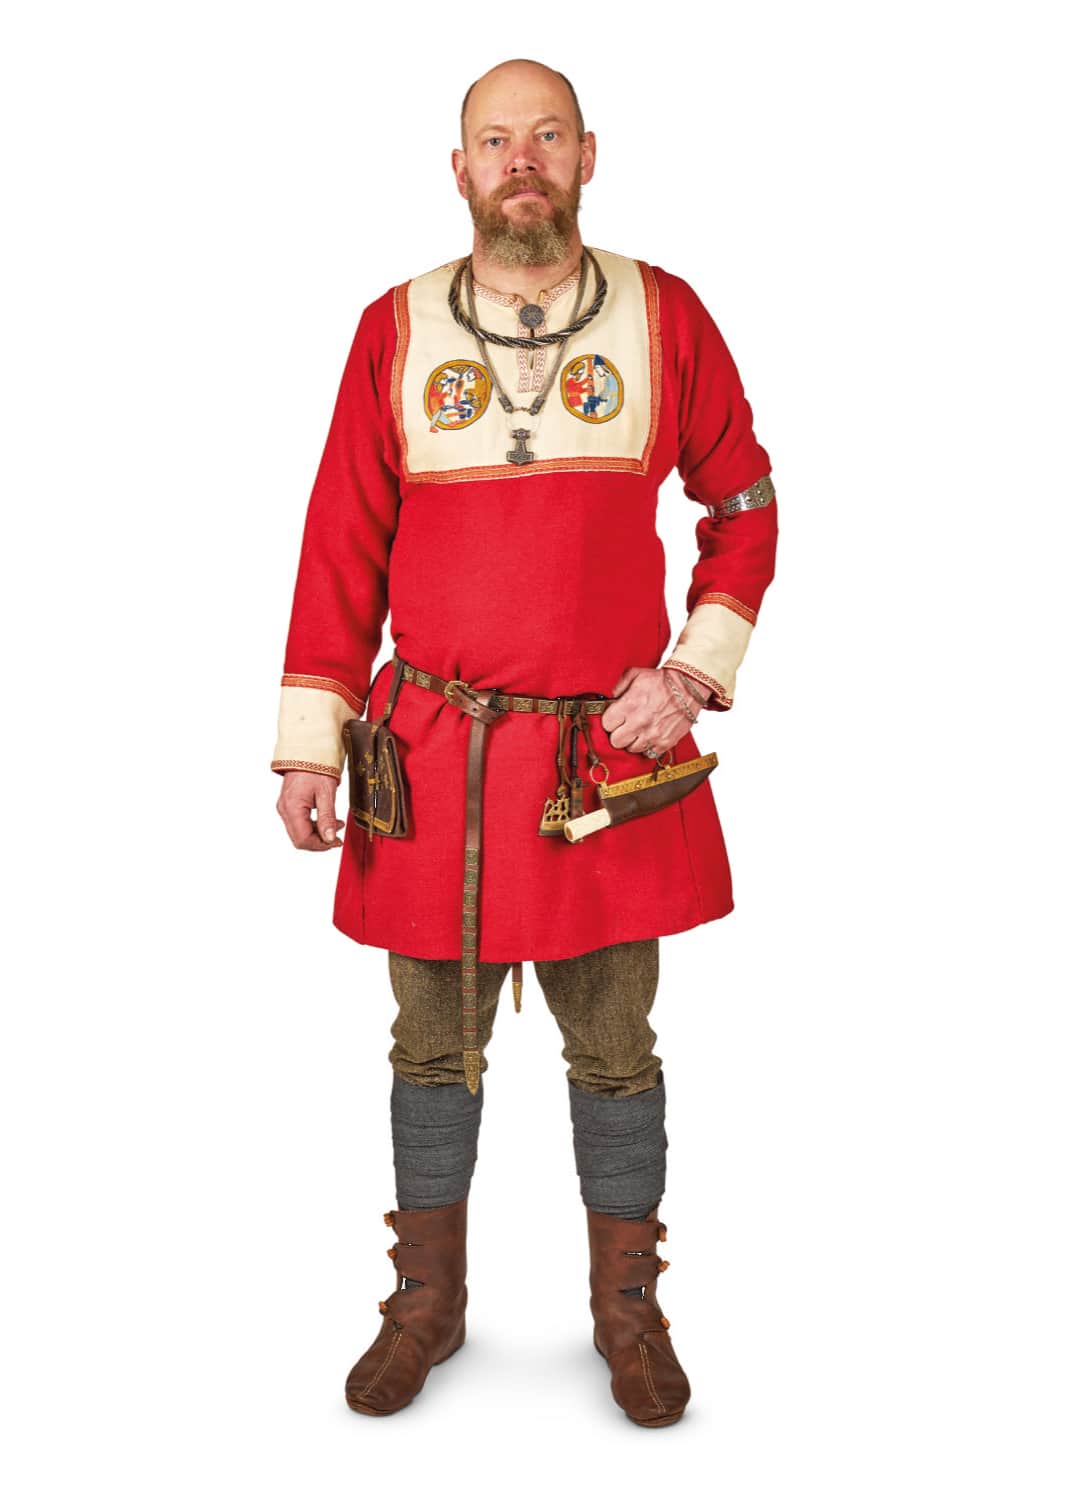 The image shows a Viking man dressed in elaborate clothes